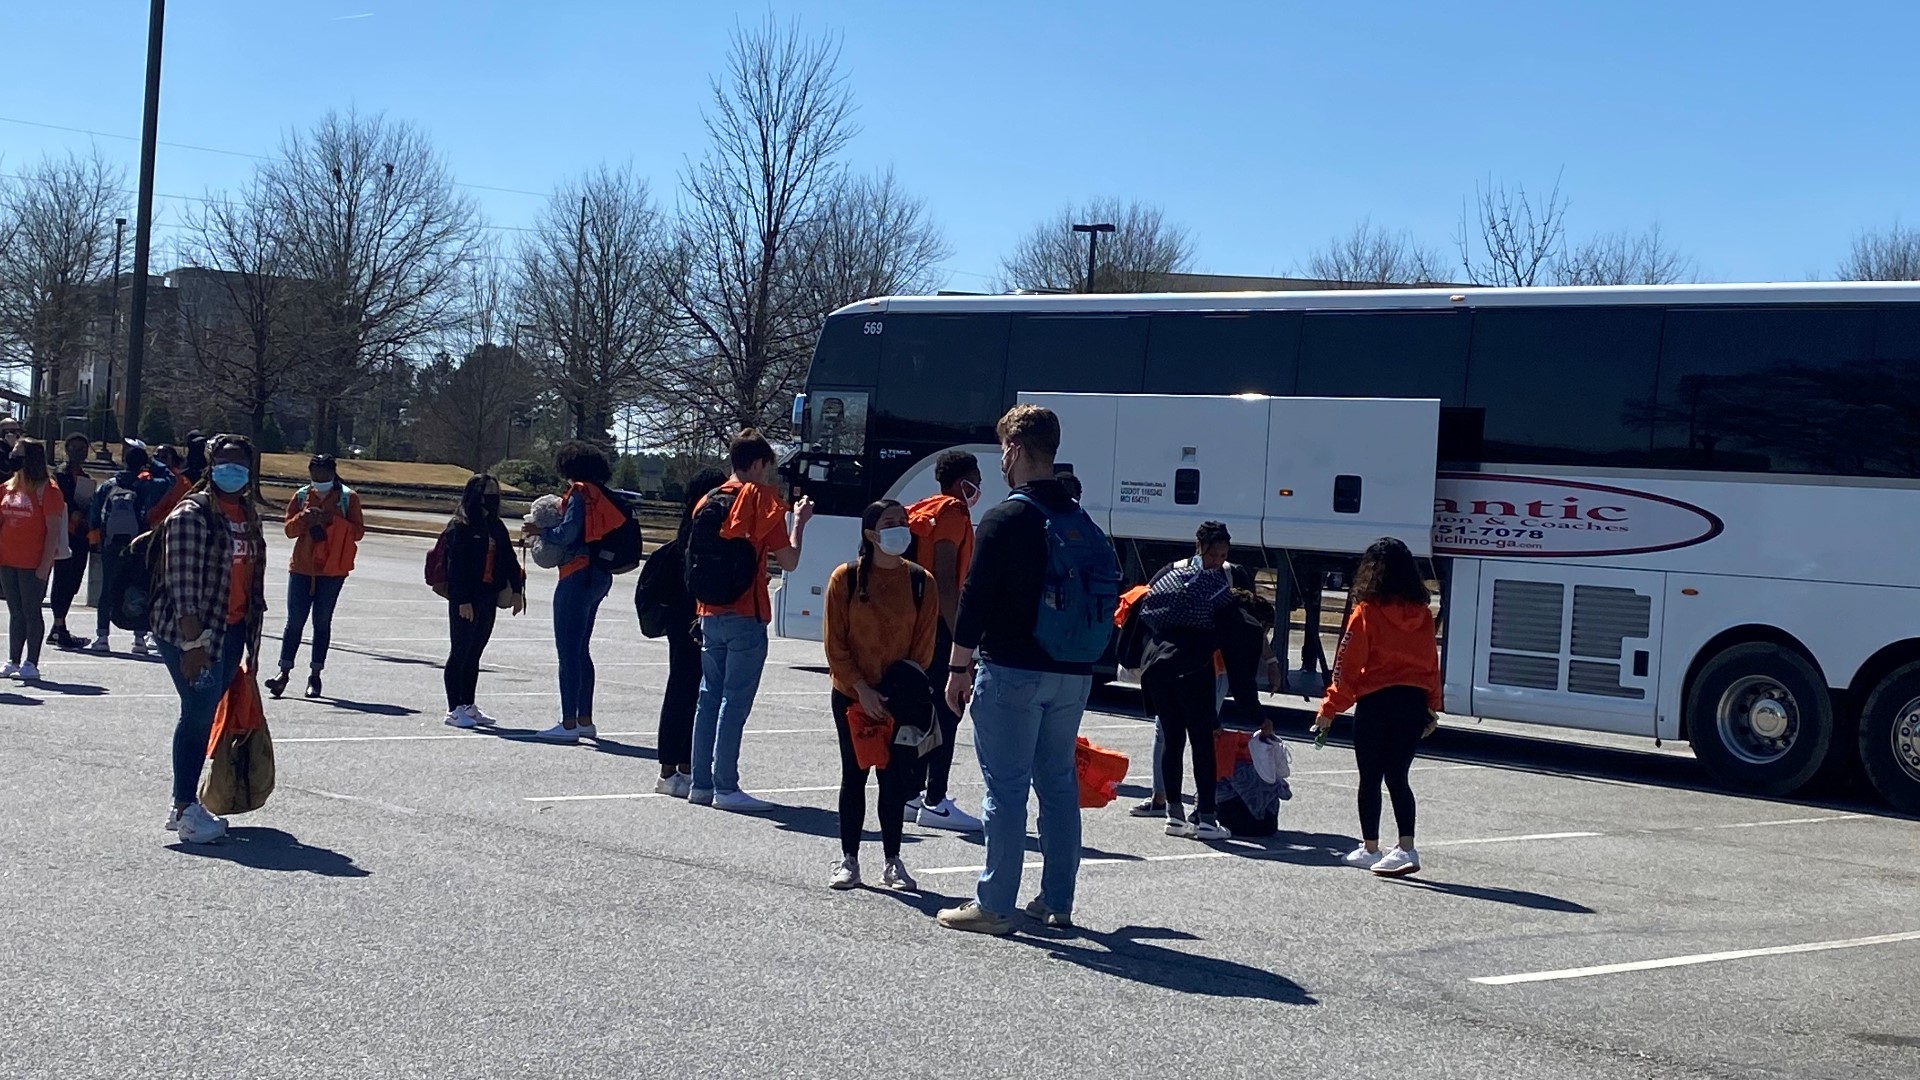 100 students took the trip to Asheville, North Carolina to will the Bears to a victory in the conference championship game.